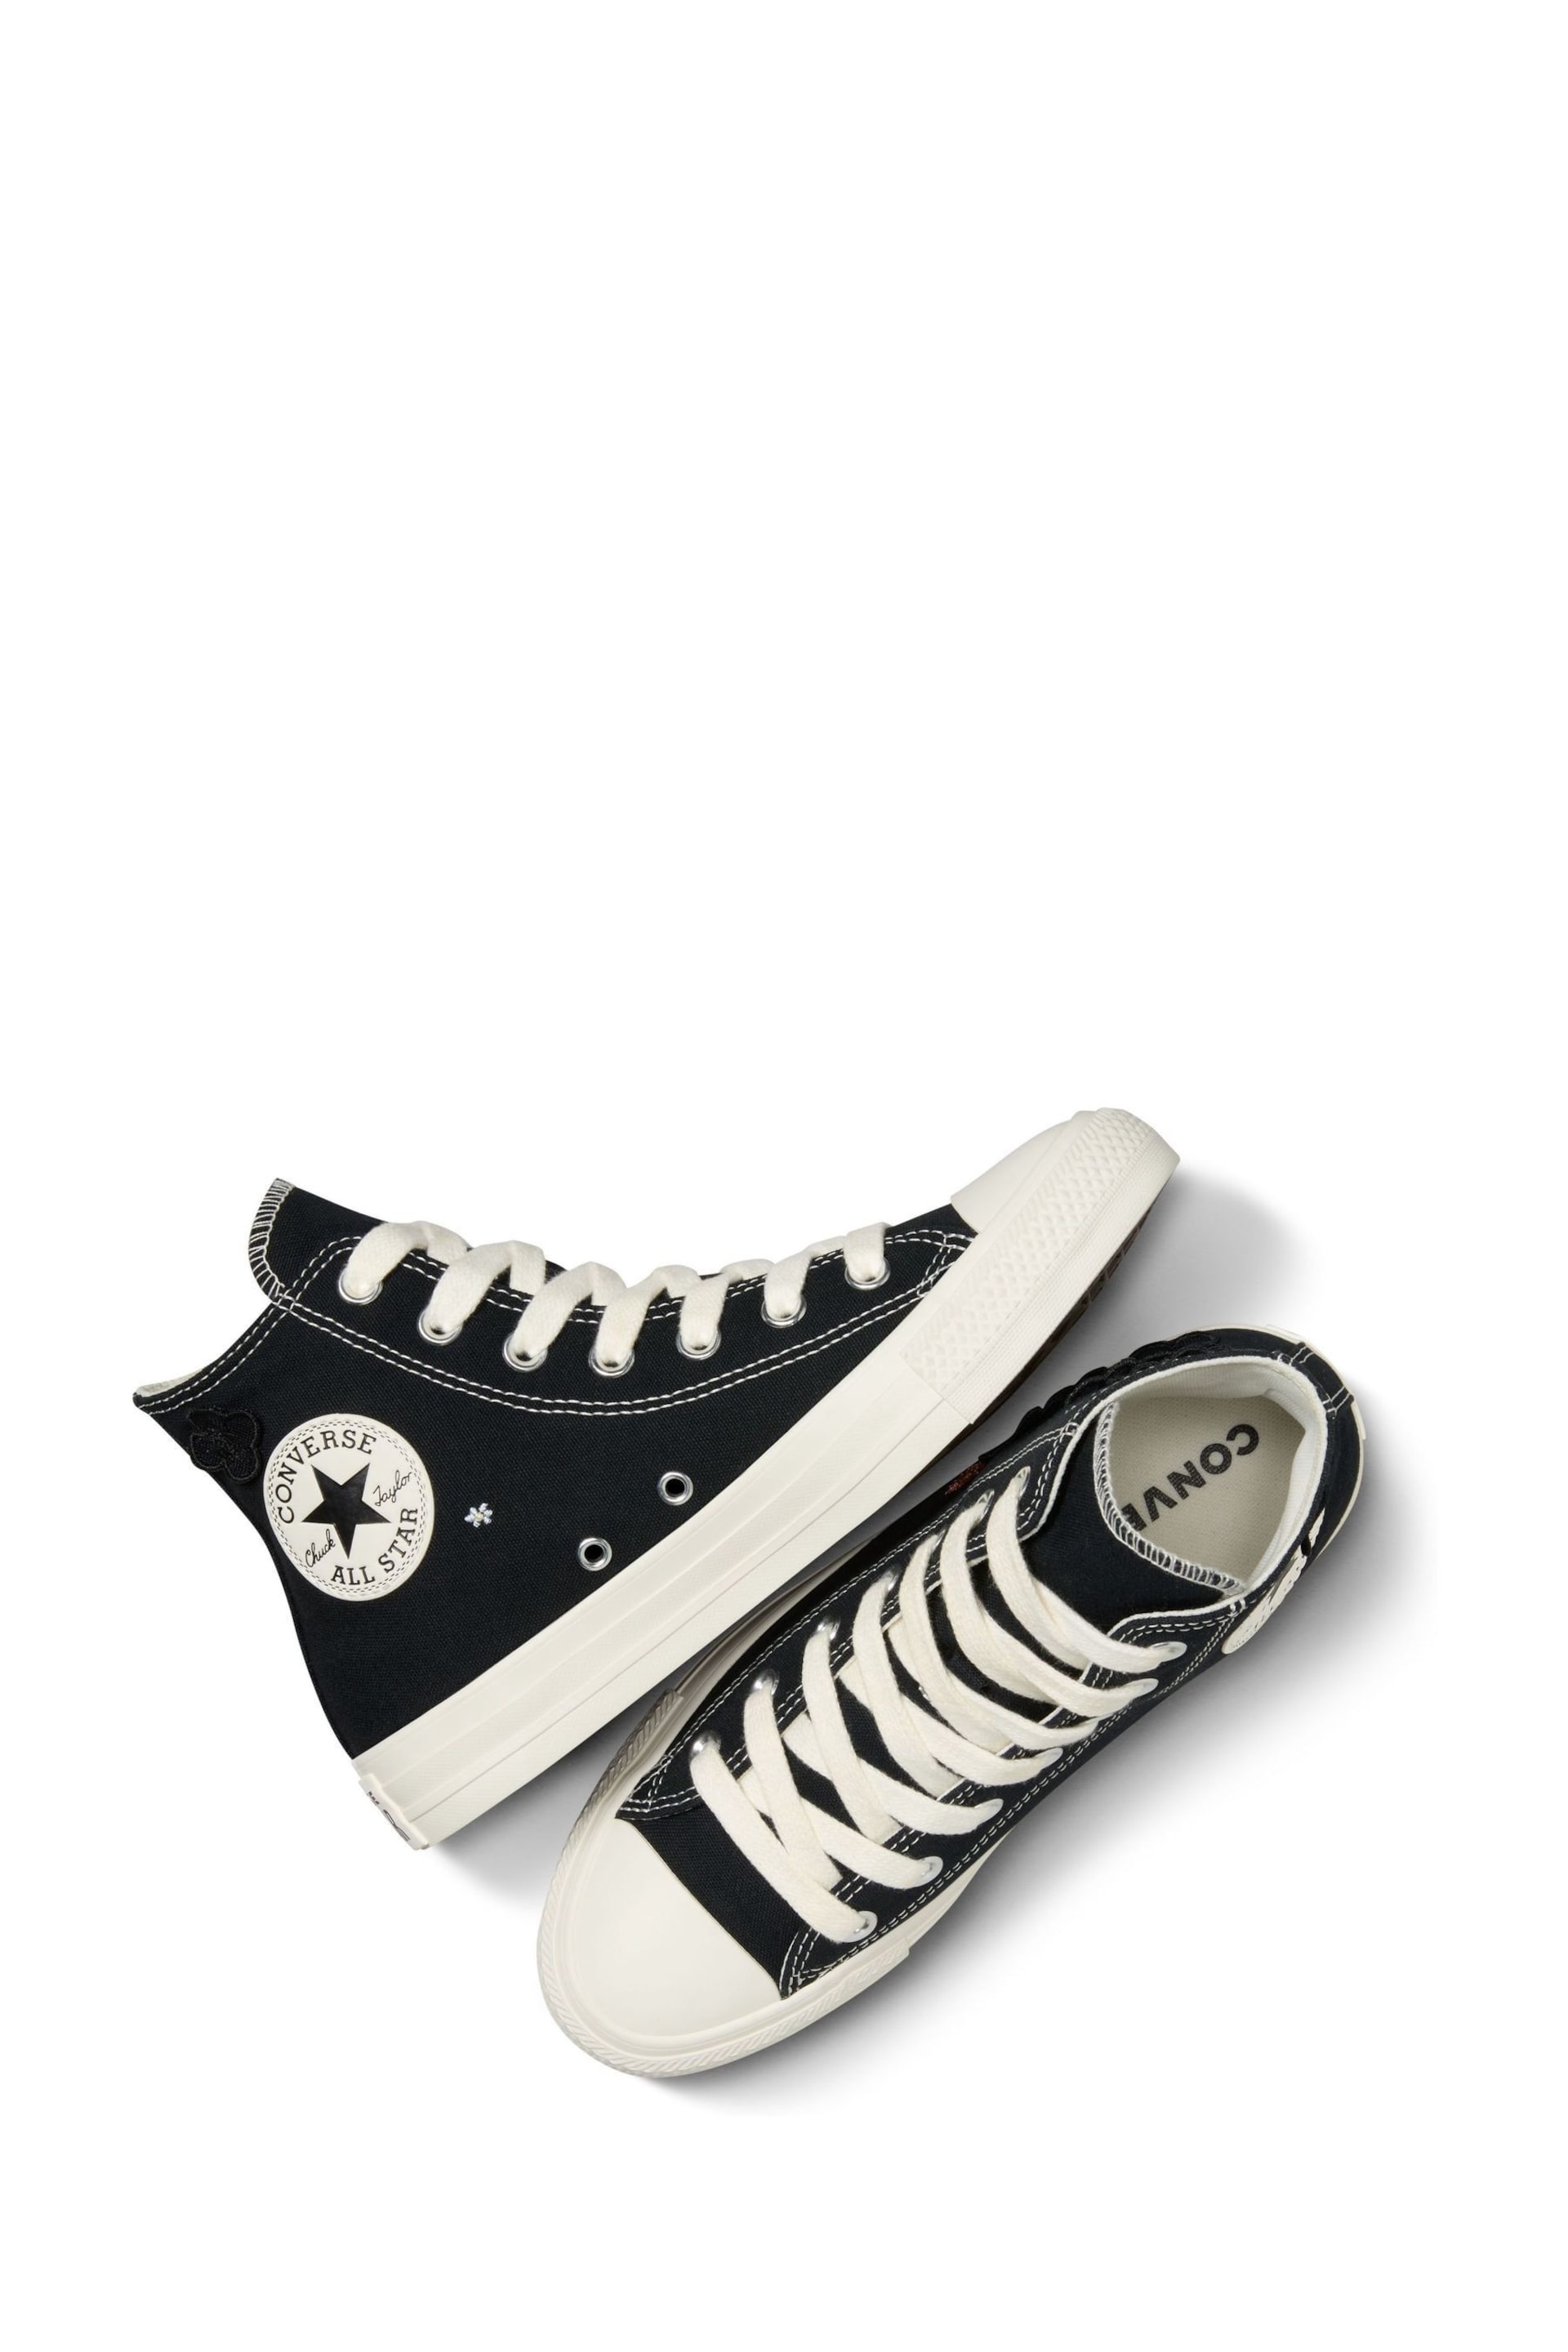 Converse Black Floral Embroidered High Top Trainers - Image 9 of 13